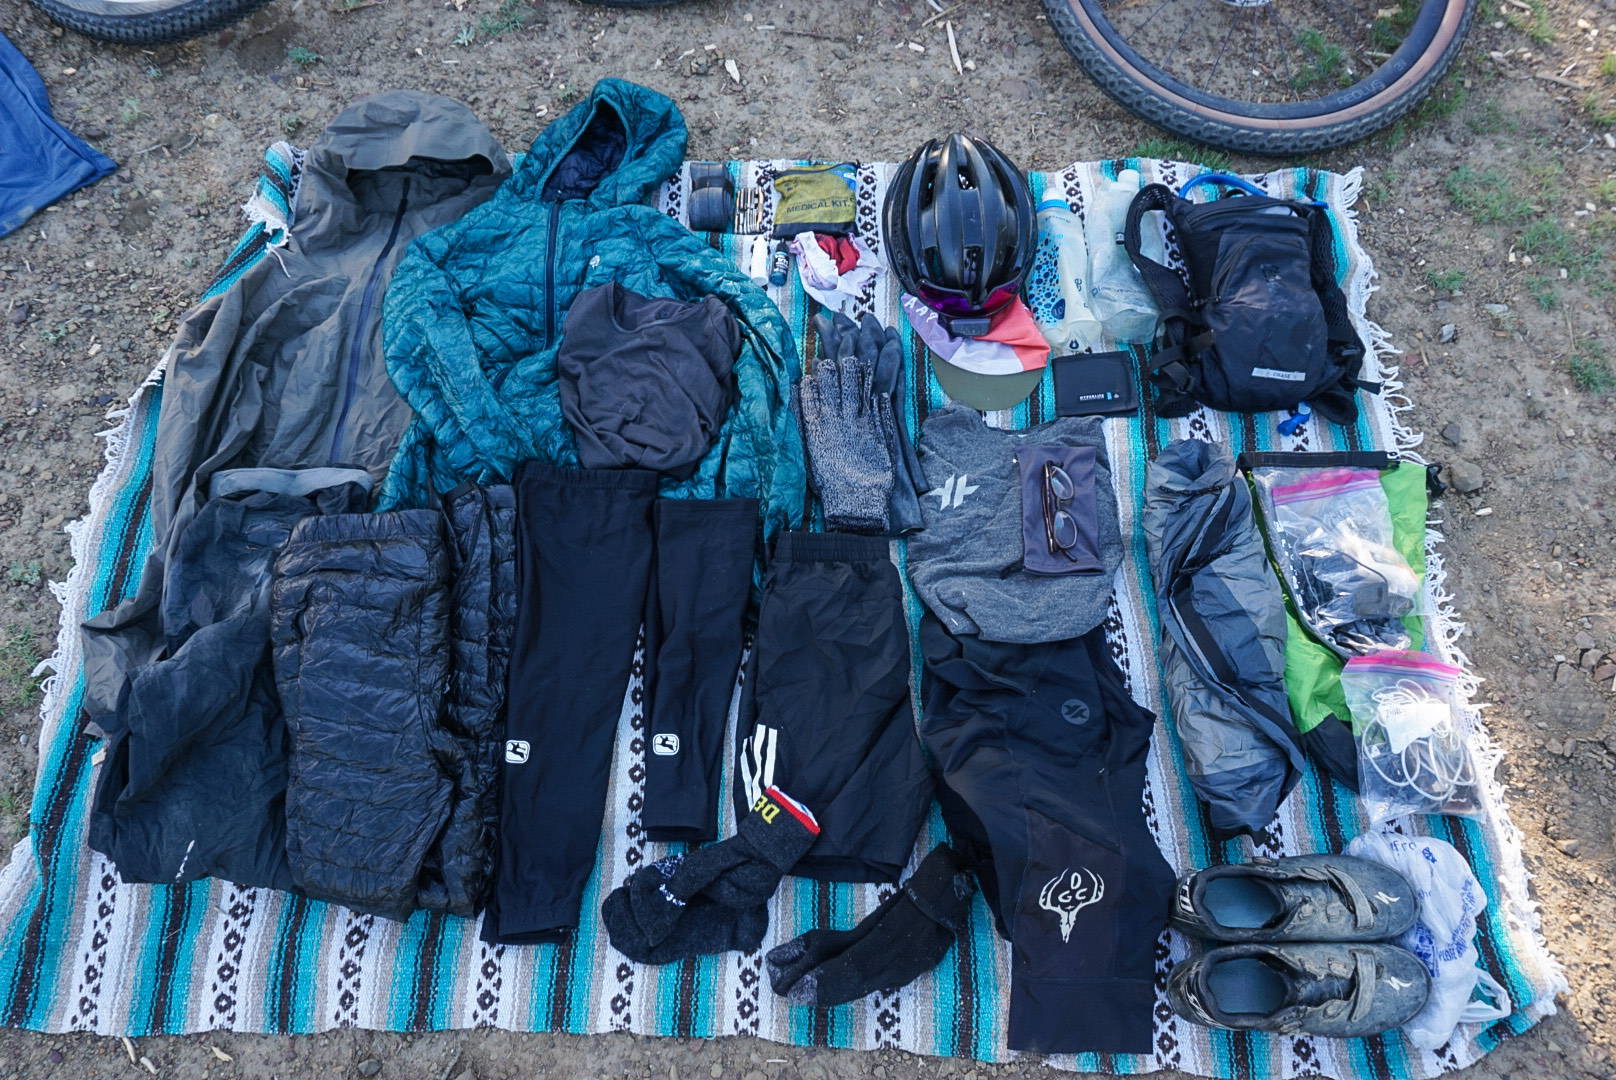 Andrew Onermaa's selection of clothes and gear for his North South Colorado bikepacking endeavor on his Otso Waheela C.